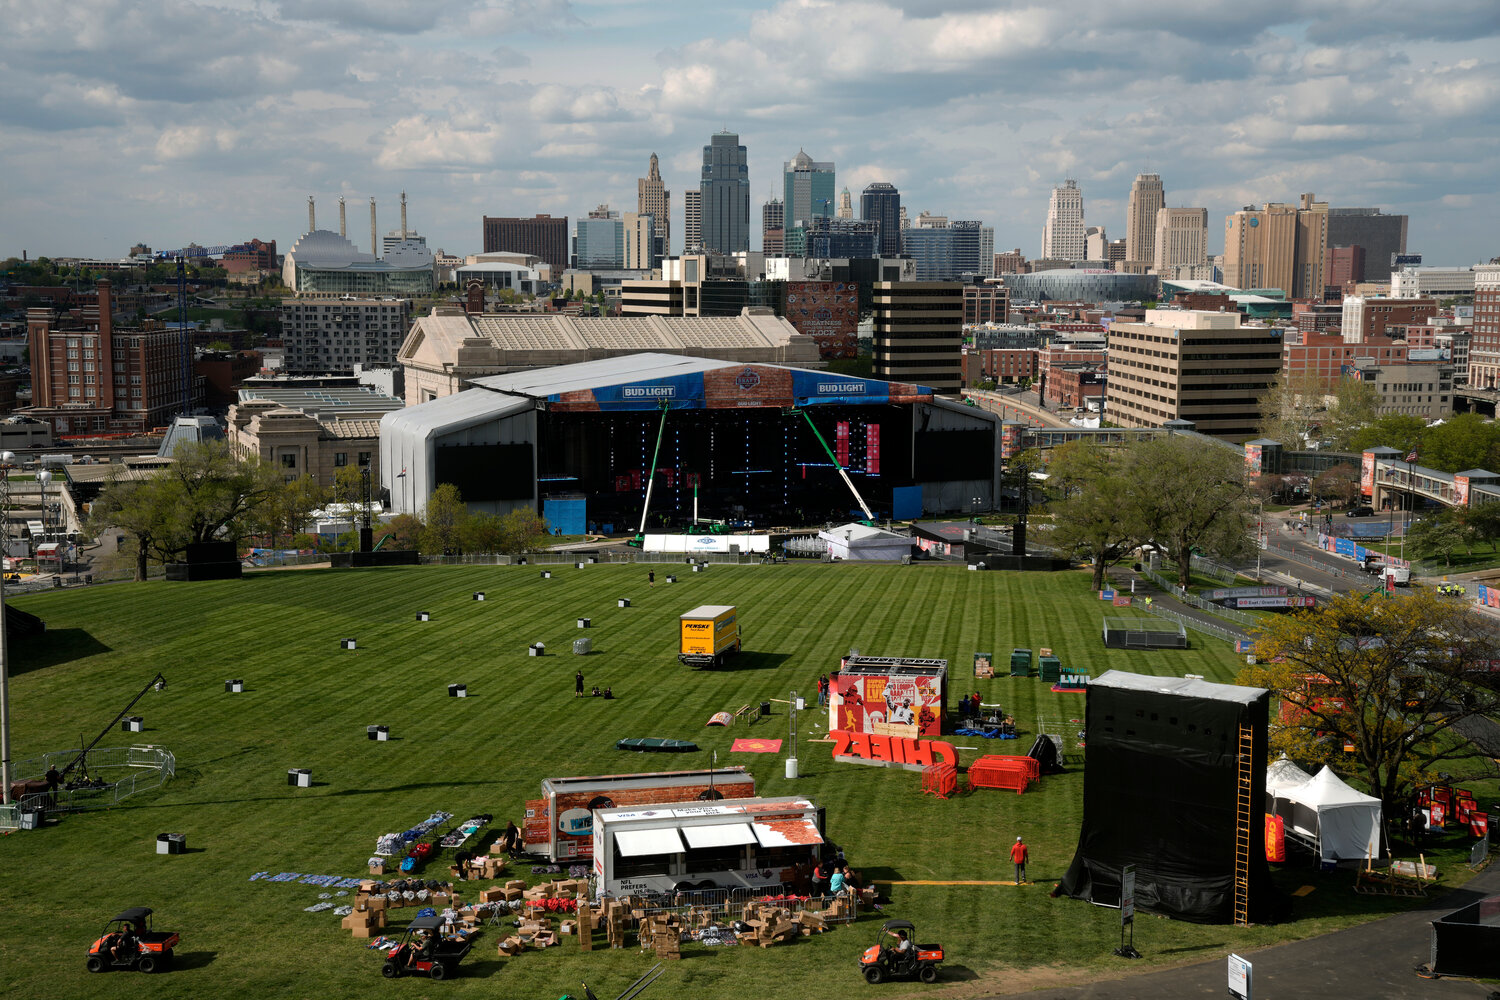 Preparations for the NFL Draft continue at Union Station in Kansas City, Mo. The draft begins Thursday night and continues through Saturday. (AP Photo/Charlie Riedel)